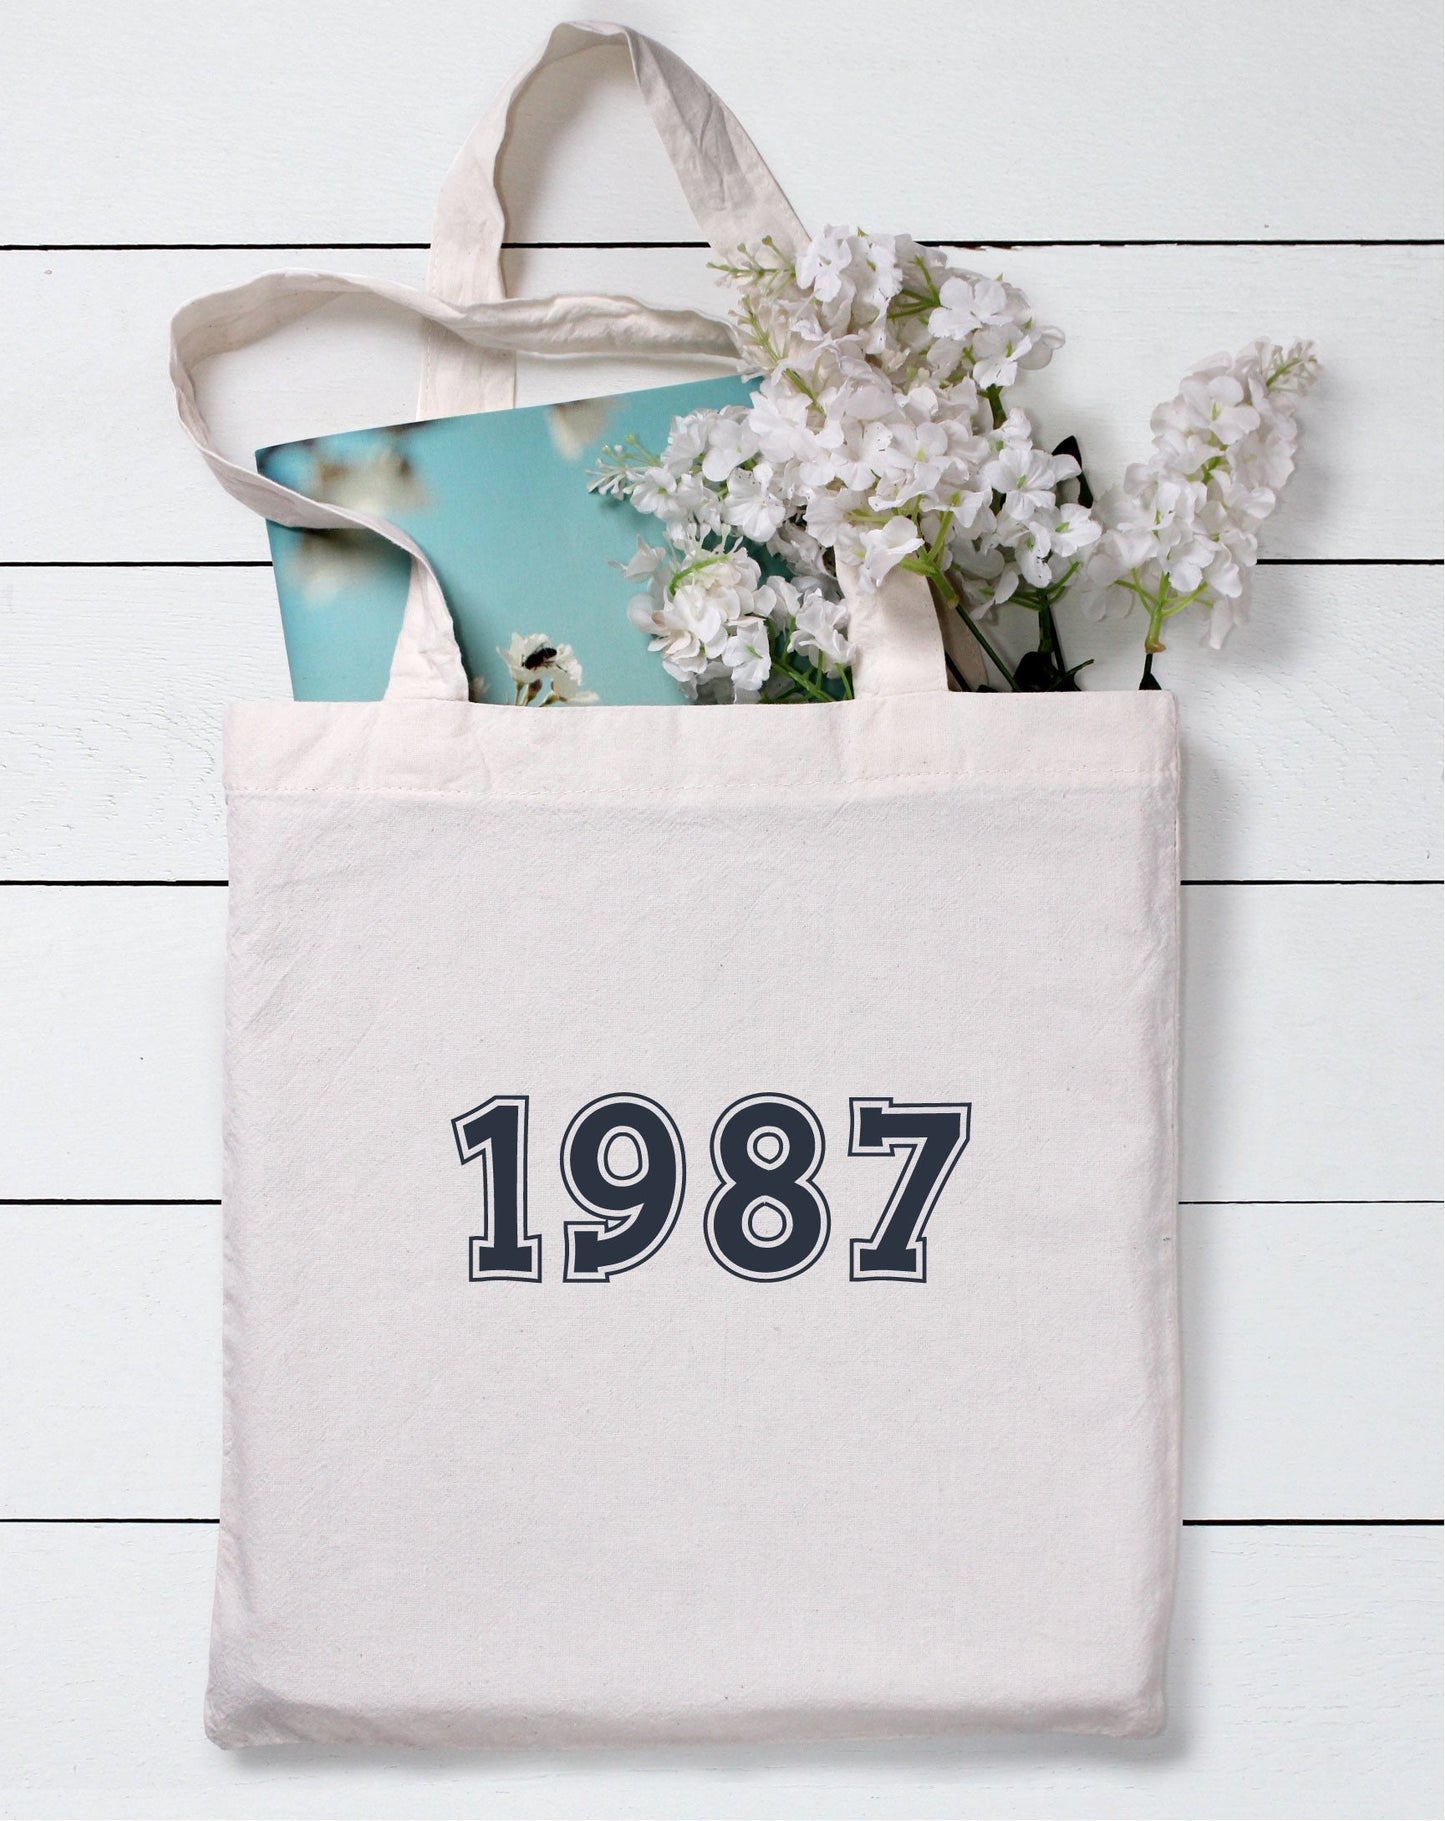 Birth year Tote Bag, personalised birthday bag, Mother’s Day gift, present for mum, daughter gifts, niece bday present, cotton bags for life